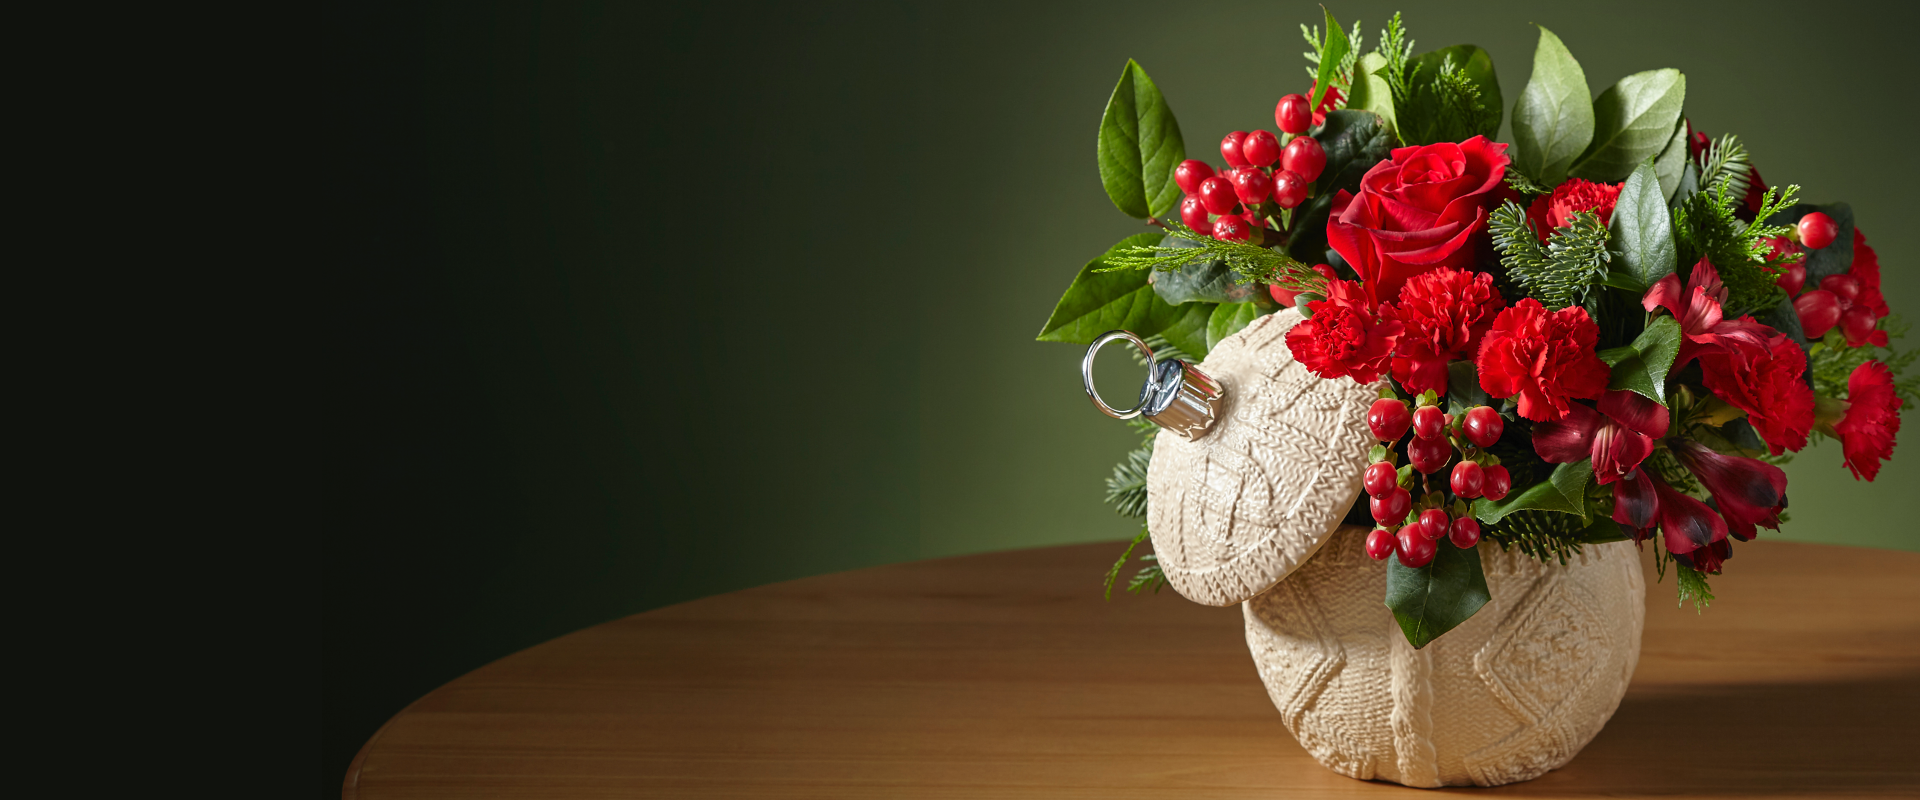 Image of Christmas bouquet in a bulb shaped vase